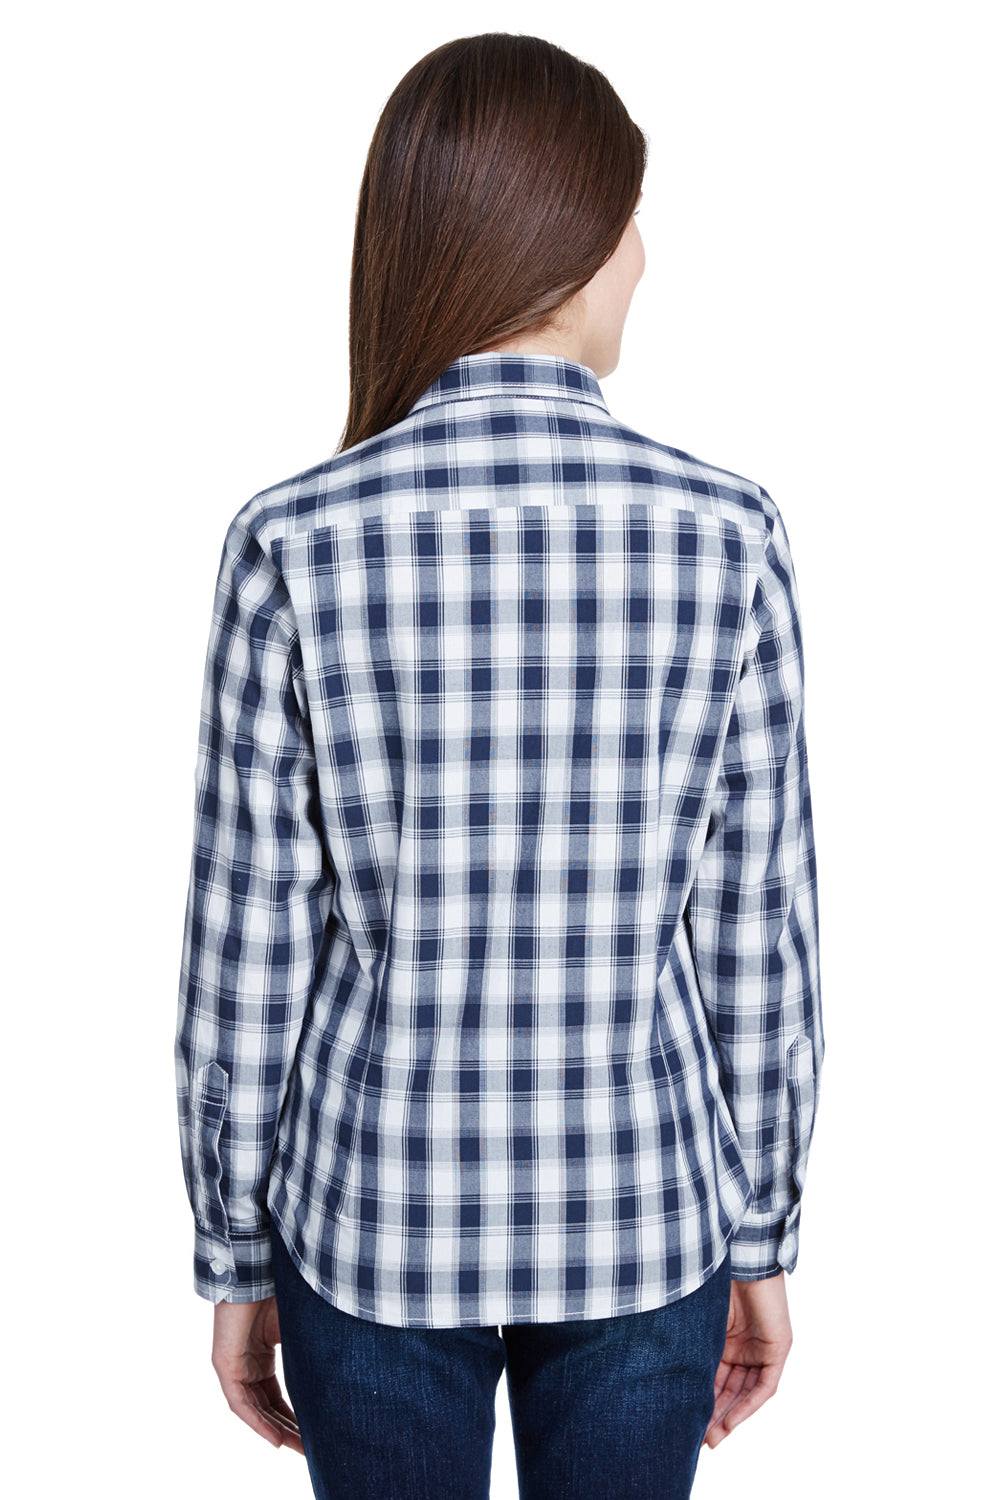 Artisan Collection RP350 Womens Mulligan Check Long Sleeve Button Down Shirt White/Navy Blue Model Back